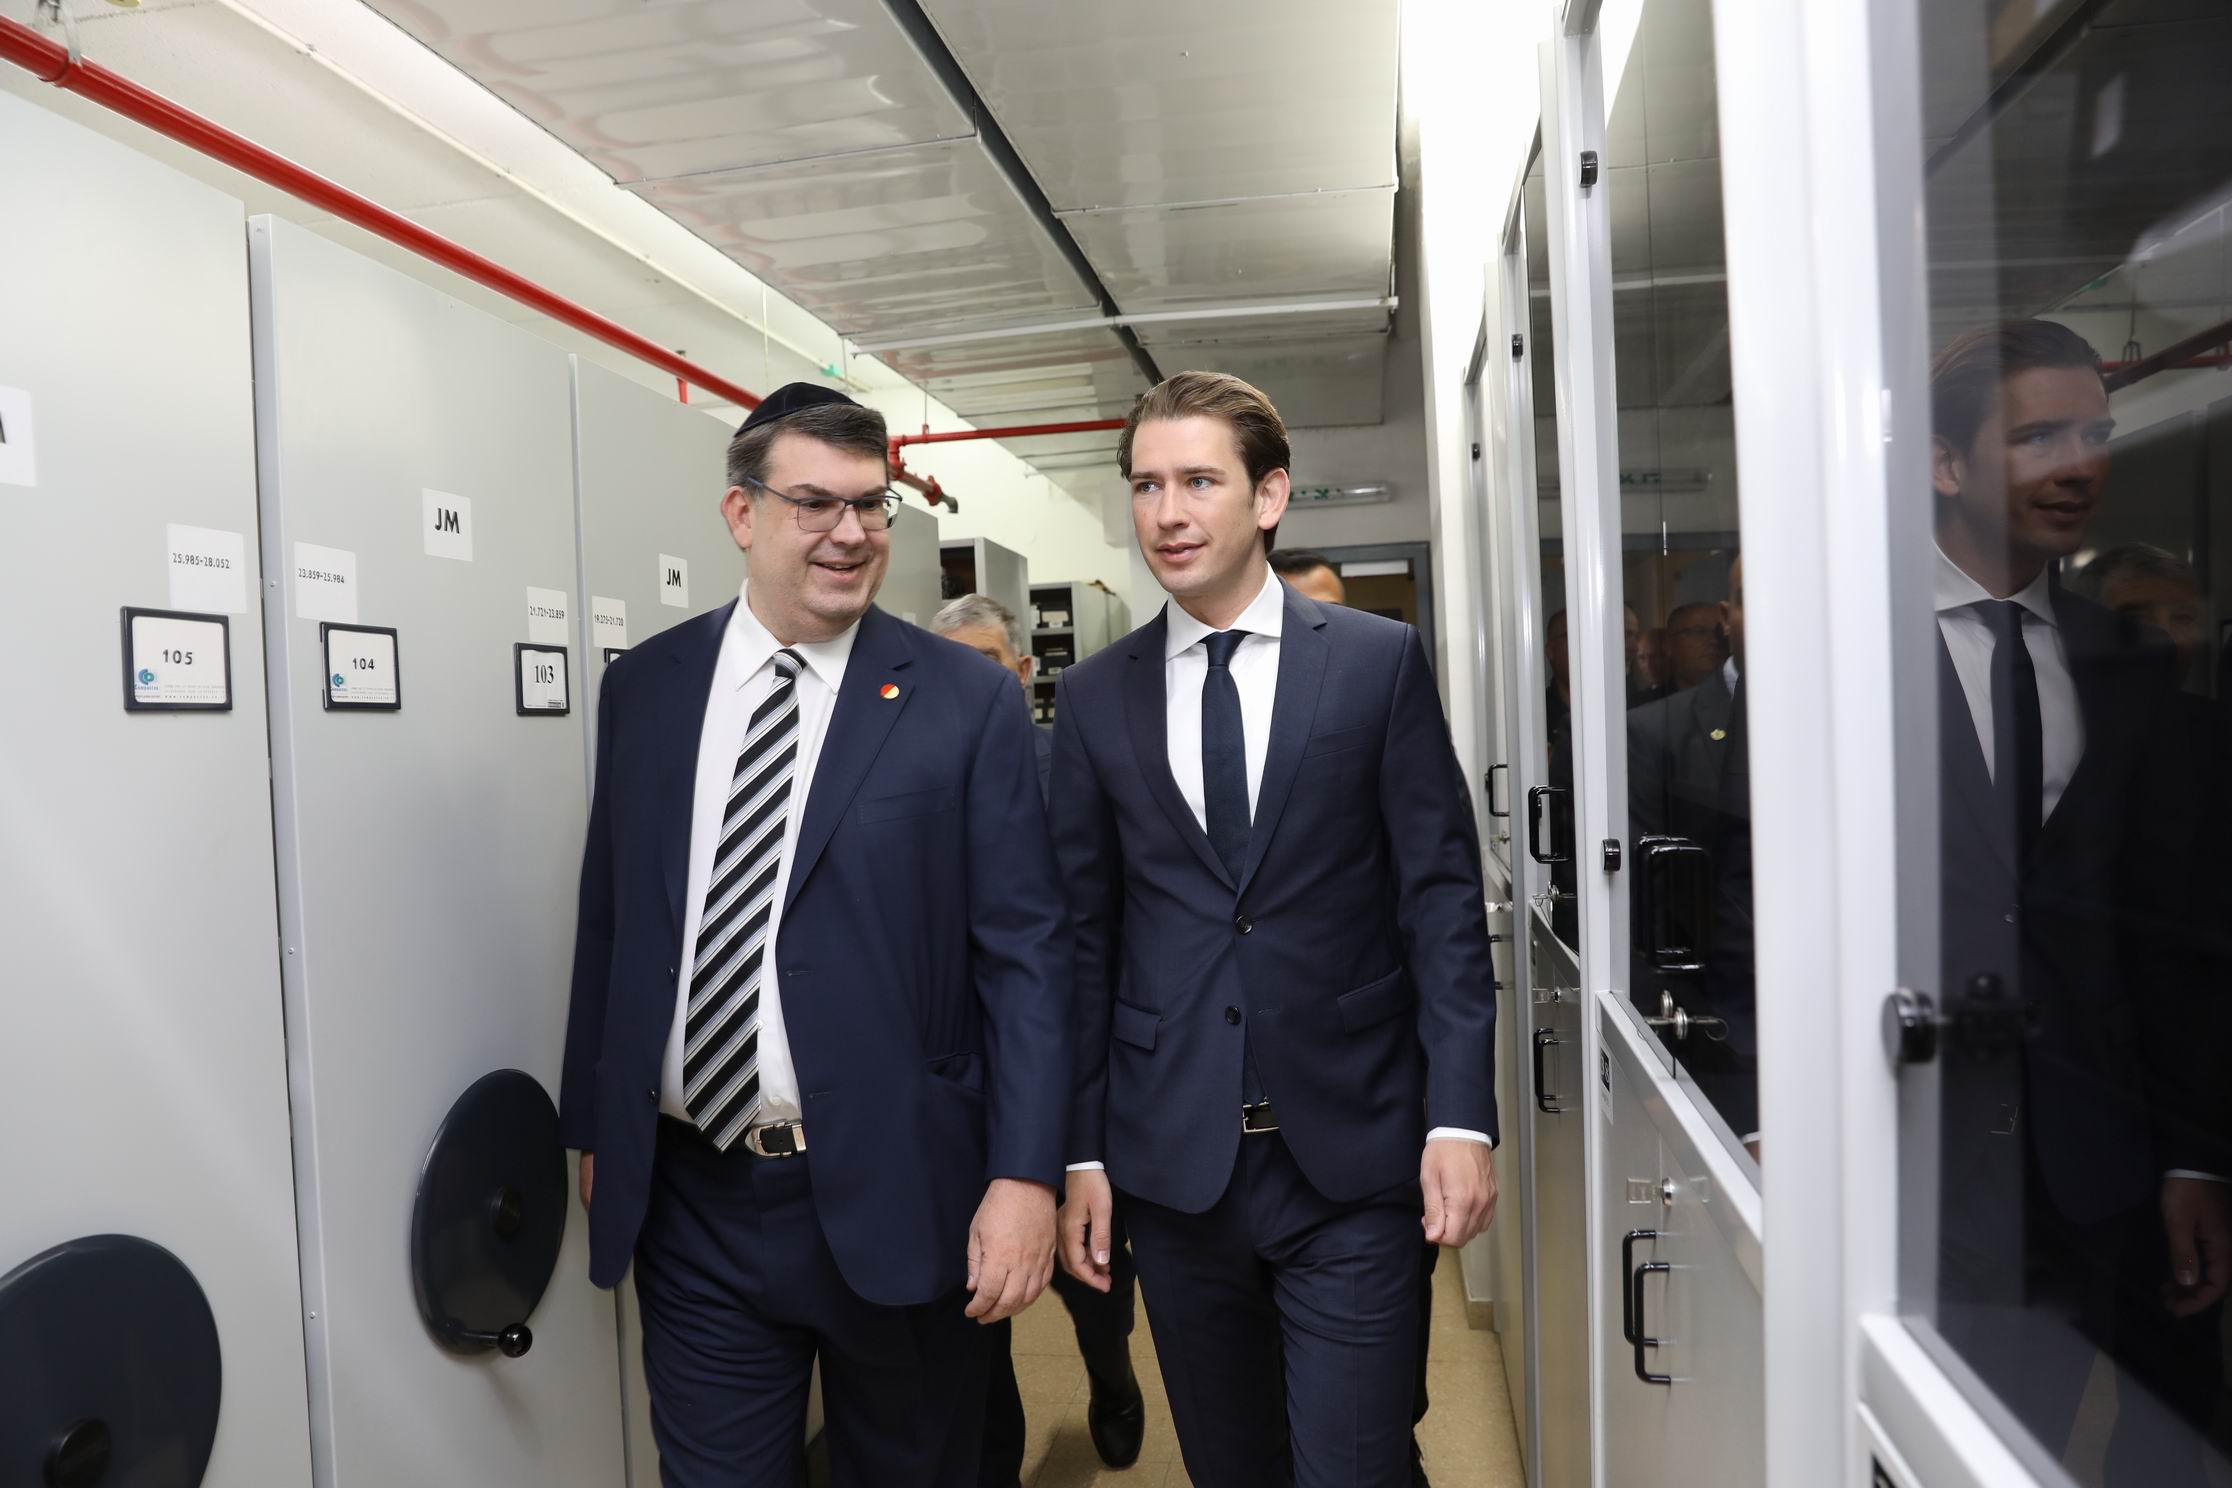 President of the Austrian Jewish Community Oskar Deutsch together with Chancellor Kurz in the Yad Vashem Archives